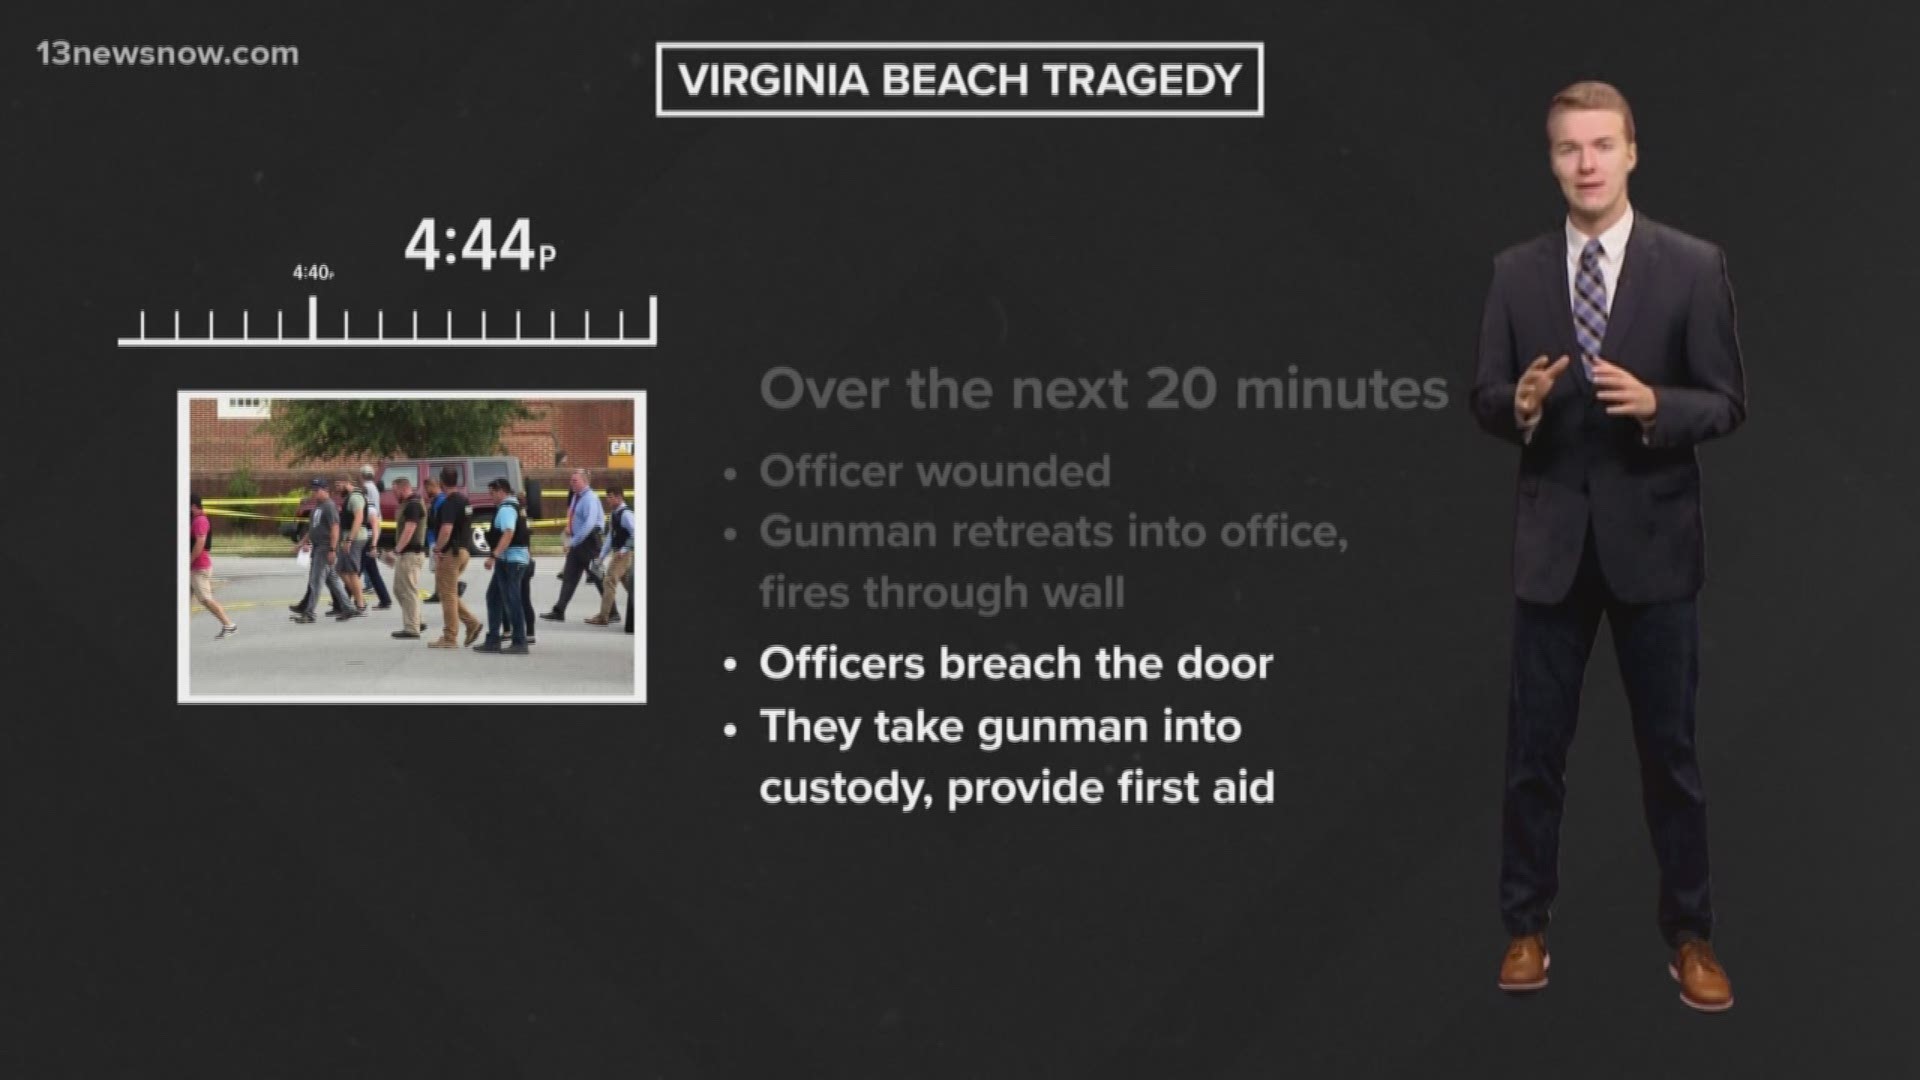 Virginia Beach Police Chief Jim Cervera gave a timeline of events that transpired Friday at the municipal center building.